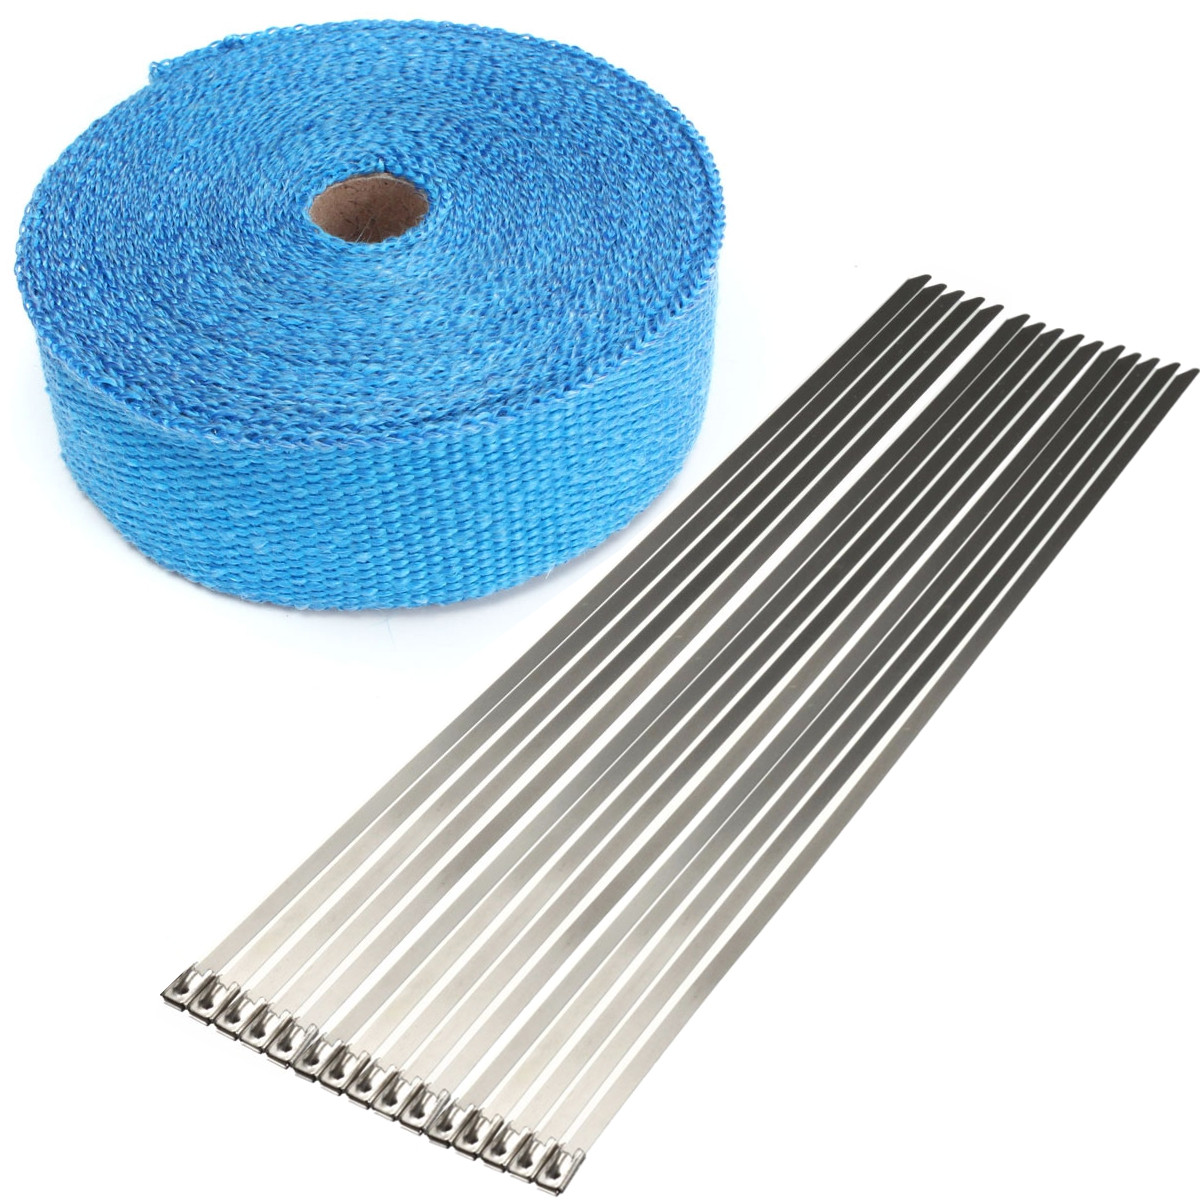 15m Exhaust Pipe Heat Wrap Manifold Header Insulating Wrap Roll Tape with 15 Ties